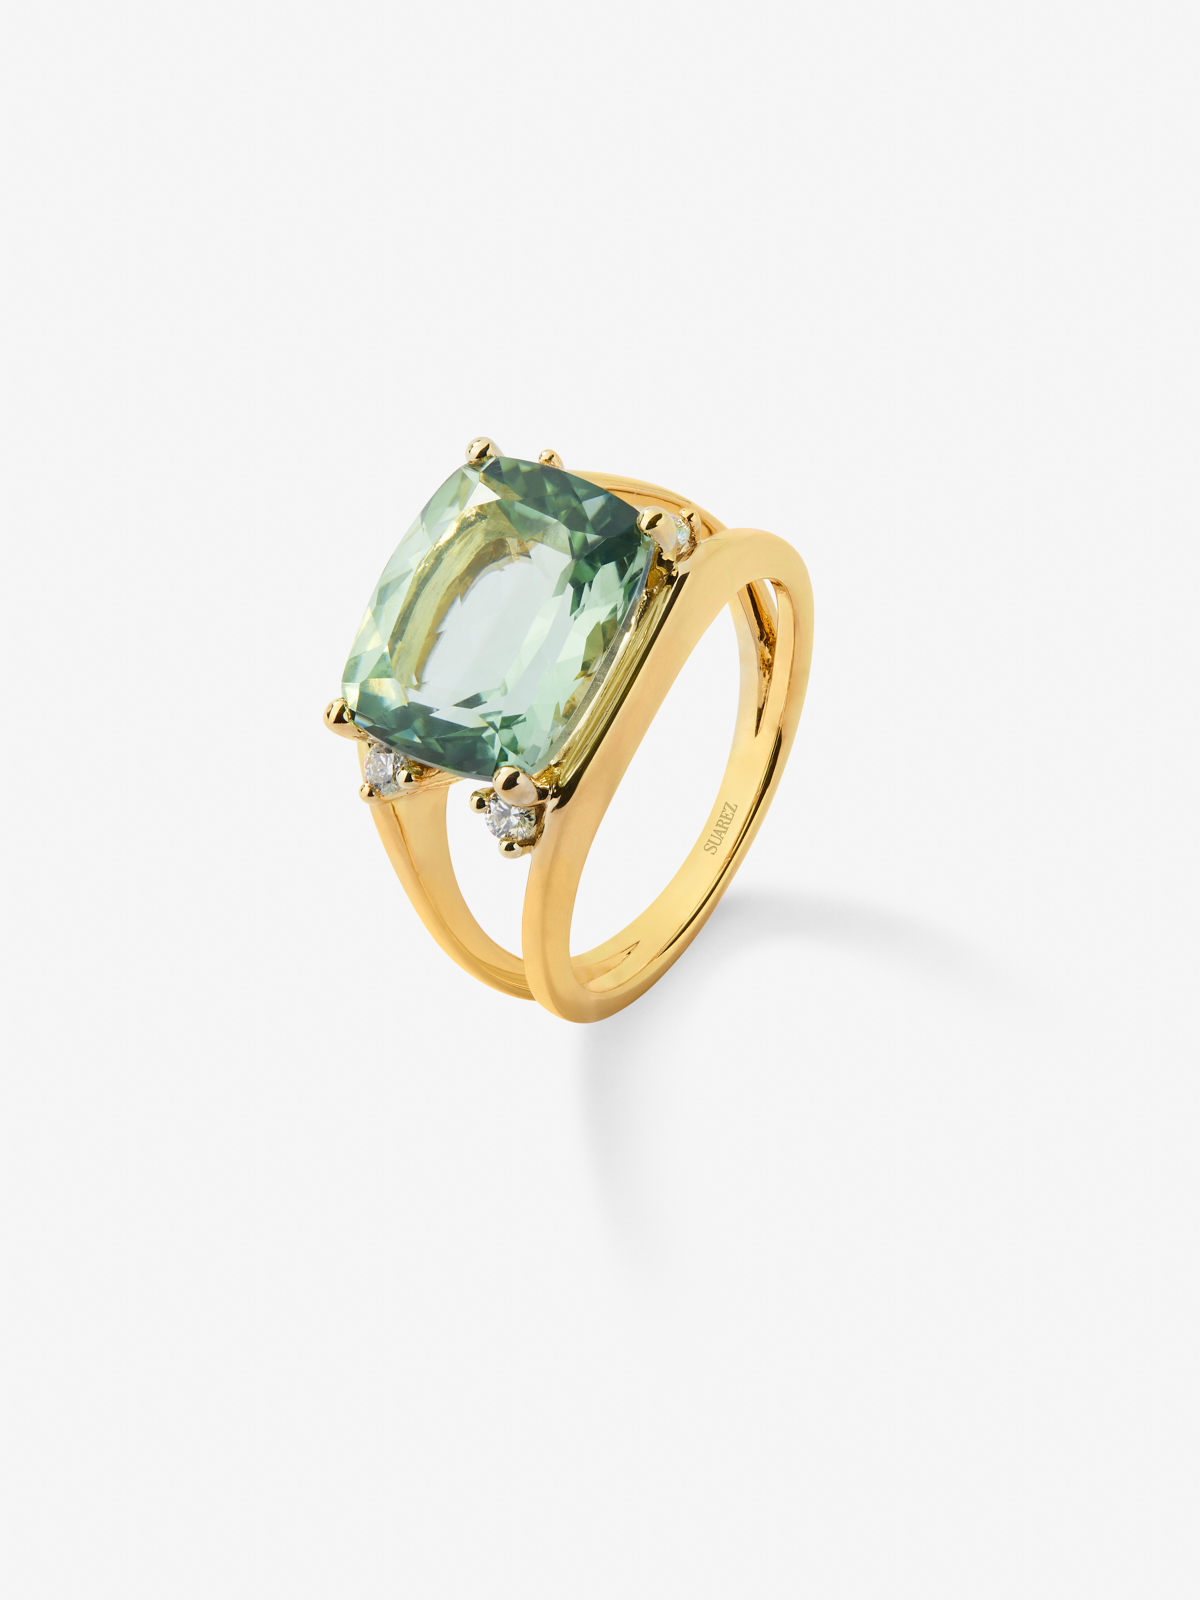 18K yellow gold ring with green amethyst in 7.3 cshion size and white diamonds in 0.13 cts